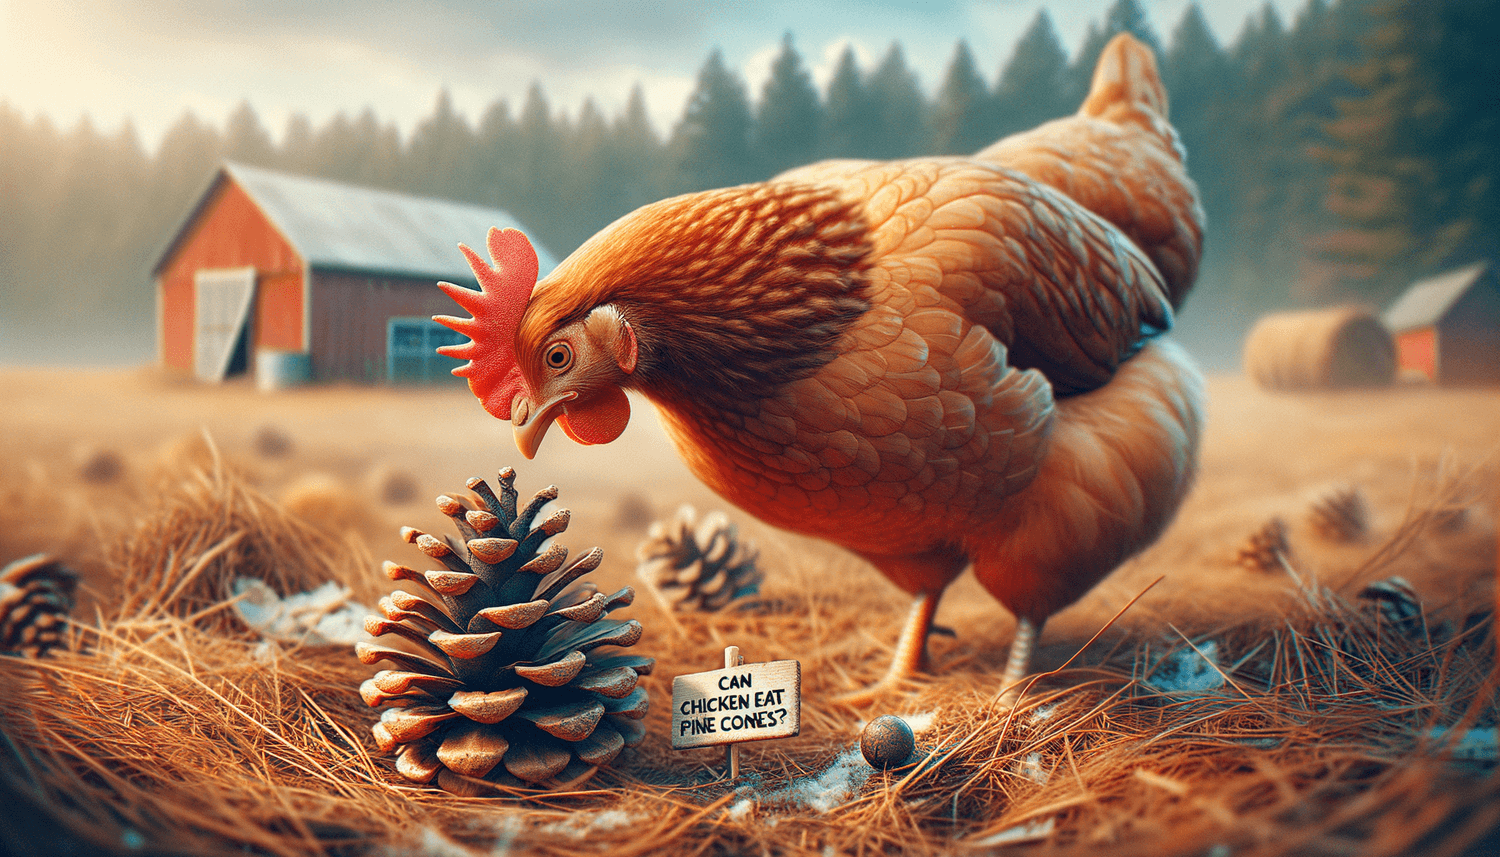 Can Chickens Eat Pine Cones?